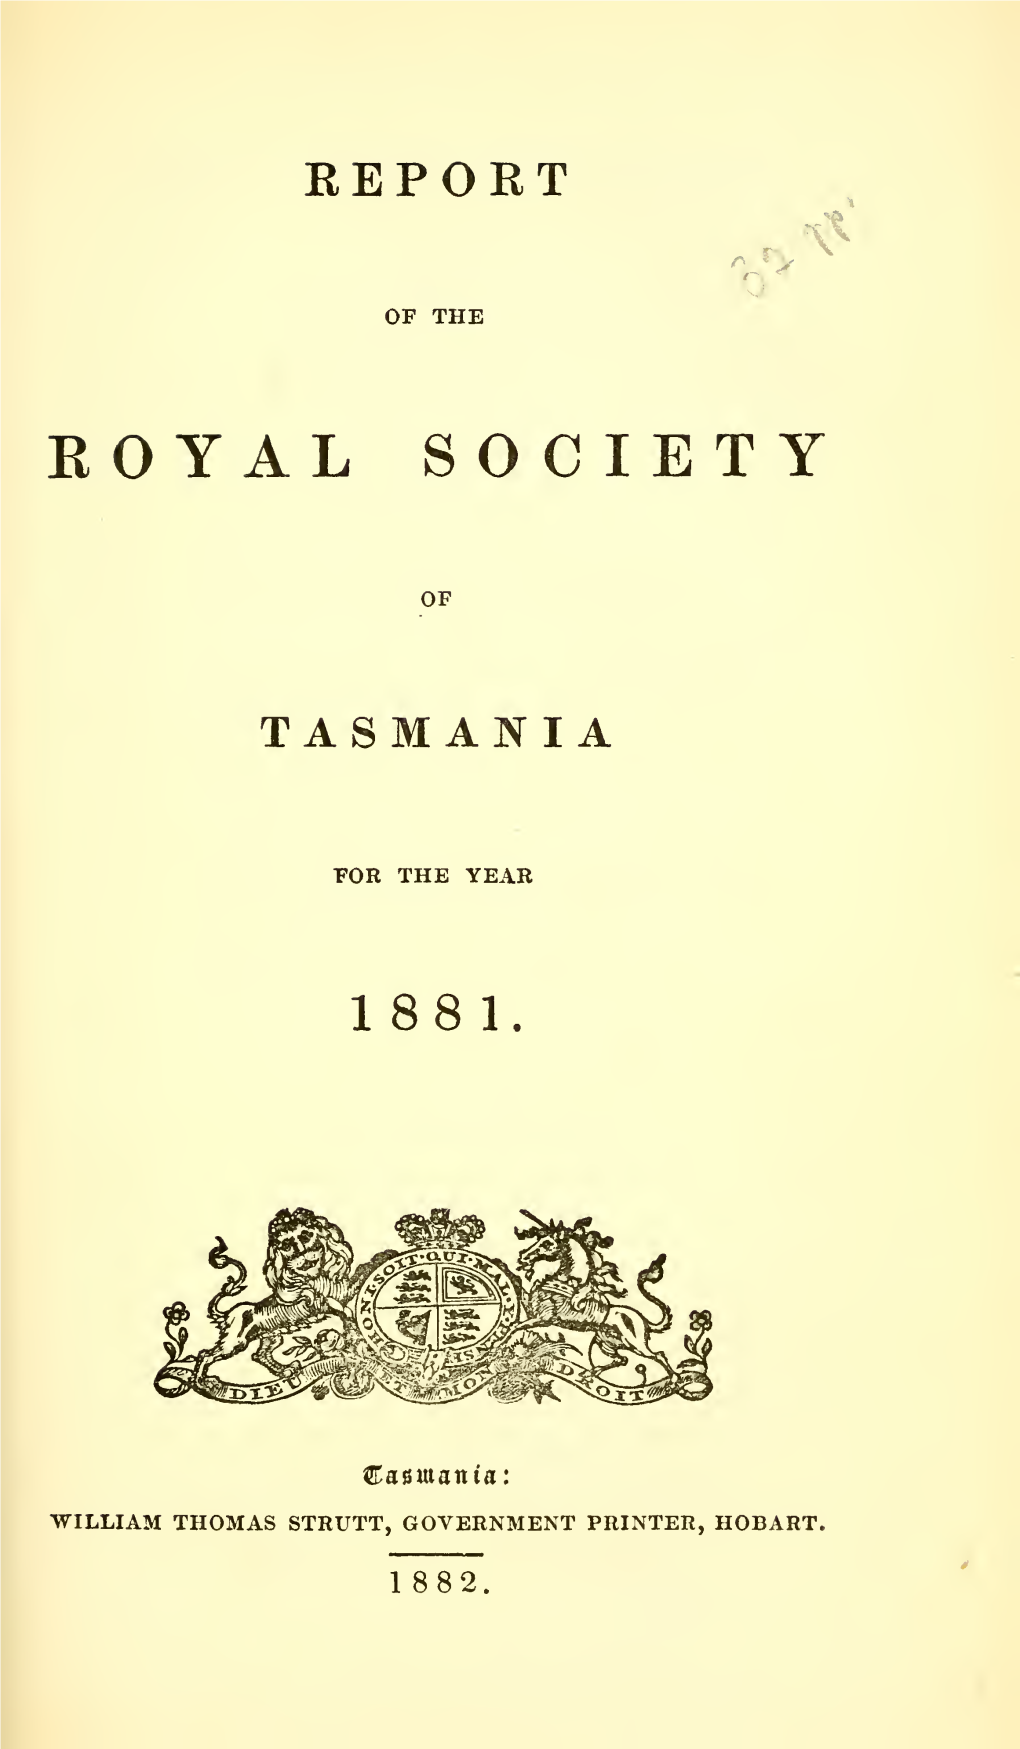 Papers and Proceedings of the Royal Society of Tasmania